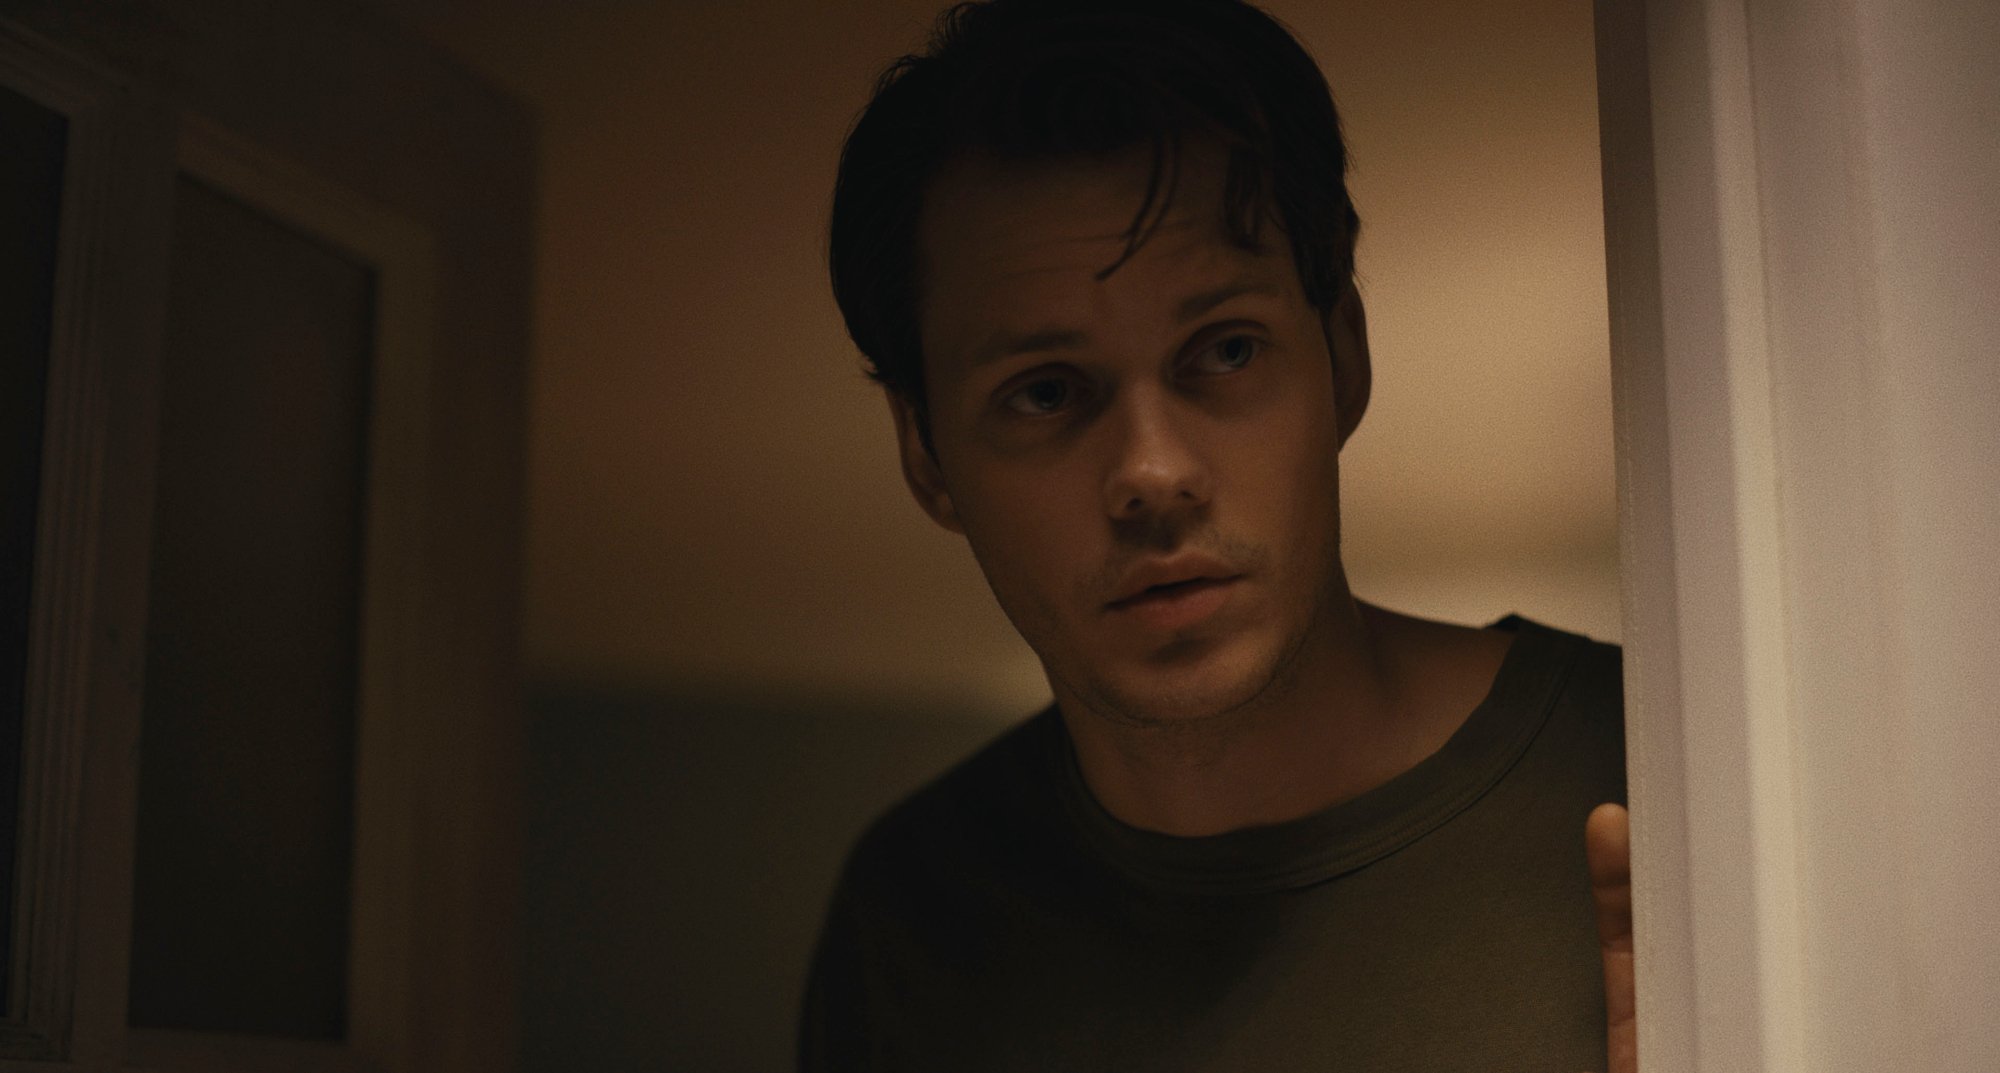 'Barbarian' Bill Skarsgård as Keith looking suspicious wearing a crew neck shirt and holding the door open